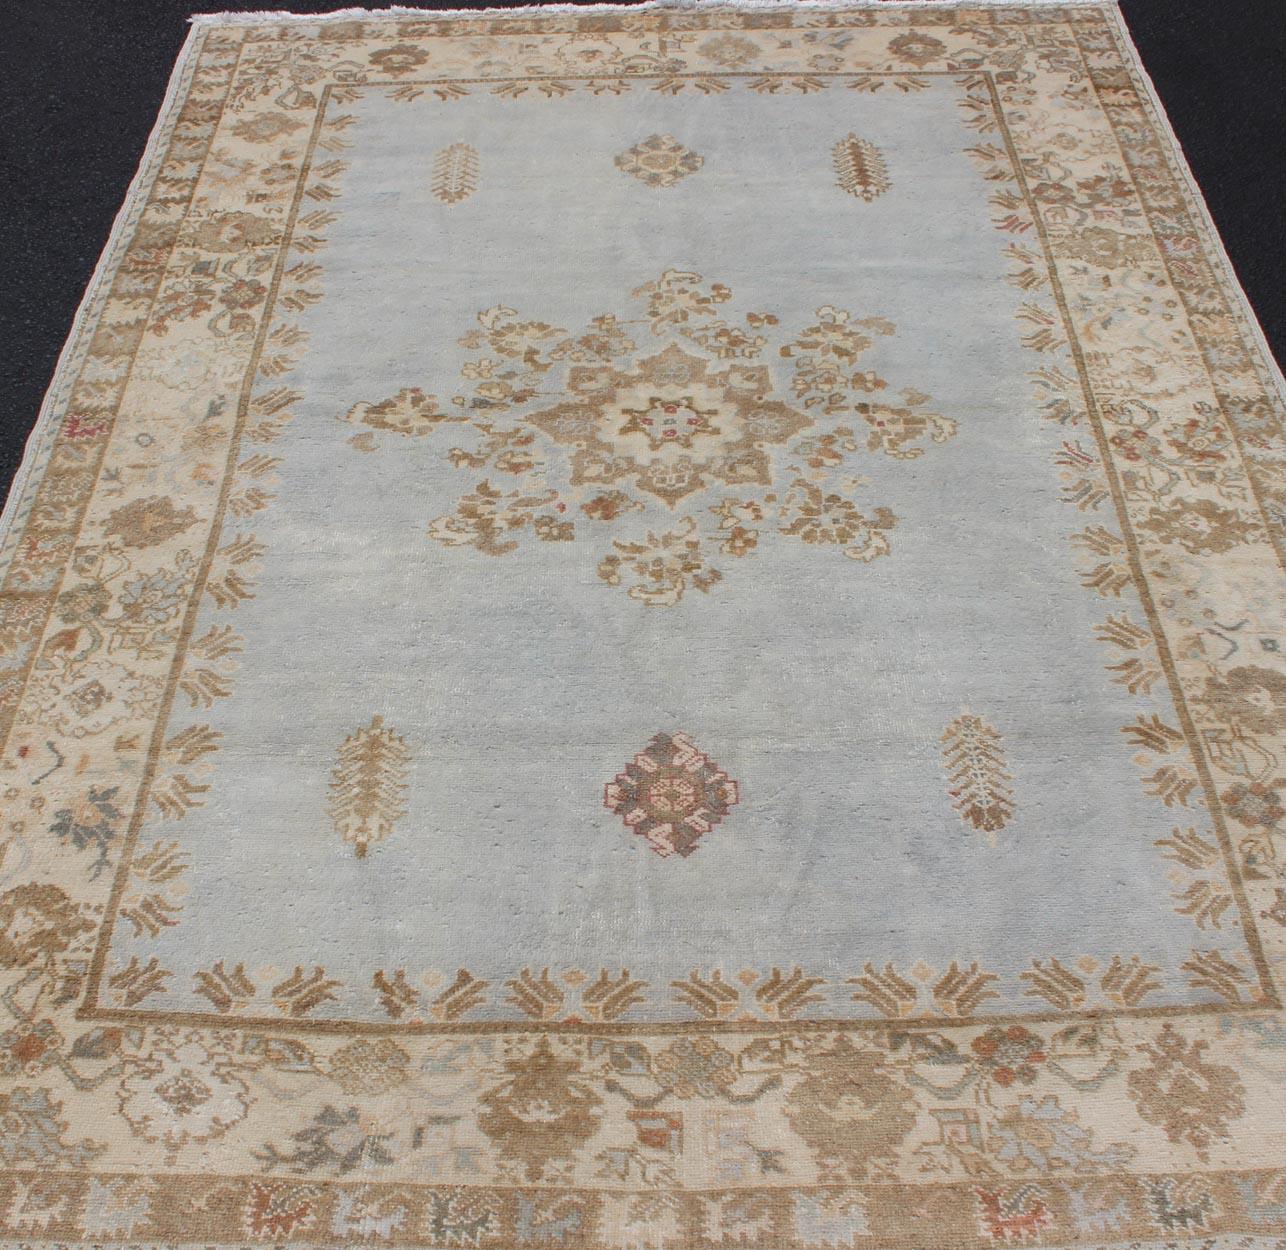 Vintage Hand Knotted Moroccan Rug in Pale Blue, Taupe and Light Brown In Good Condition For Sale In Atlanta, GA